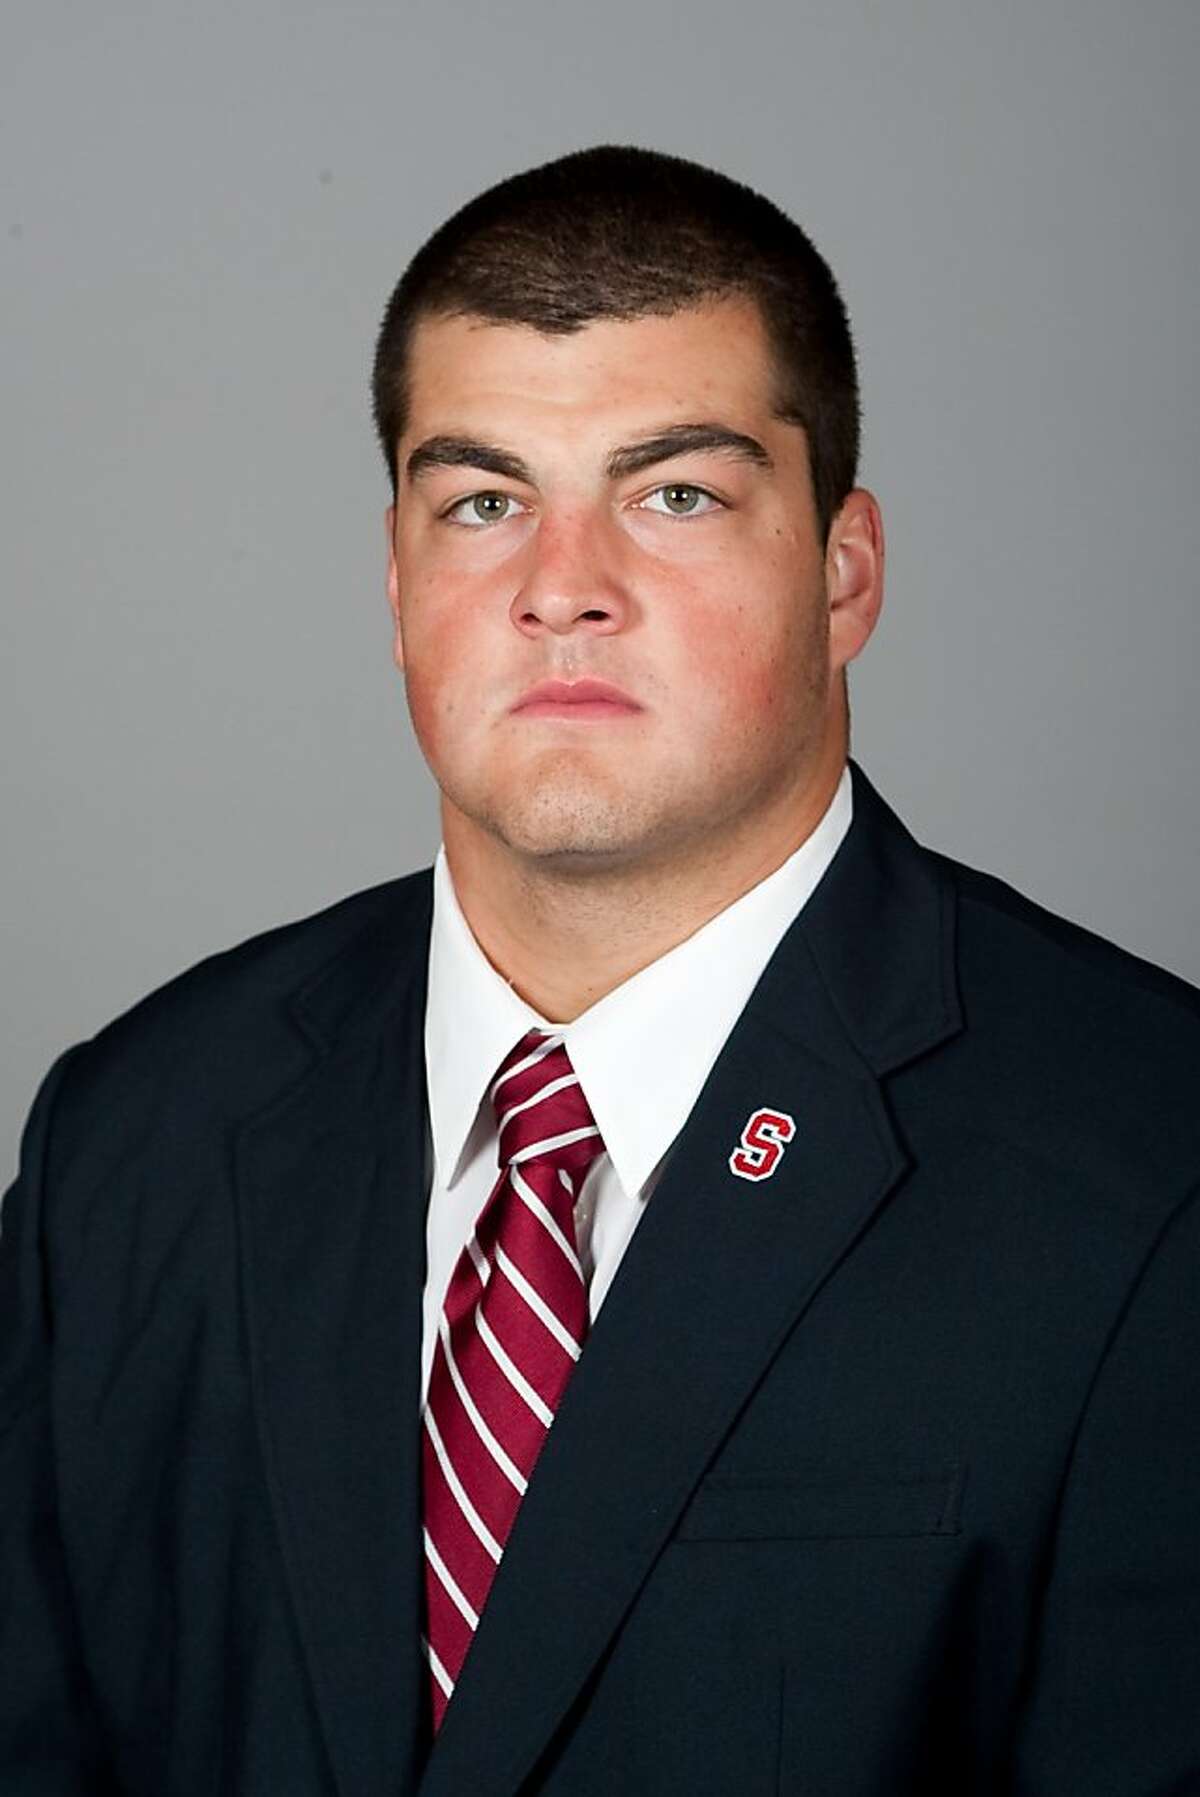 David DeCastro, Stanford. 2011. STANFORD, CA-MAY 12, 2011- Stanford Football team headshots.